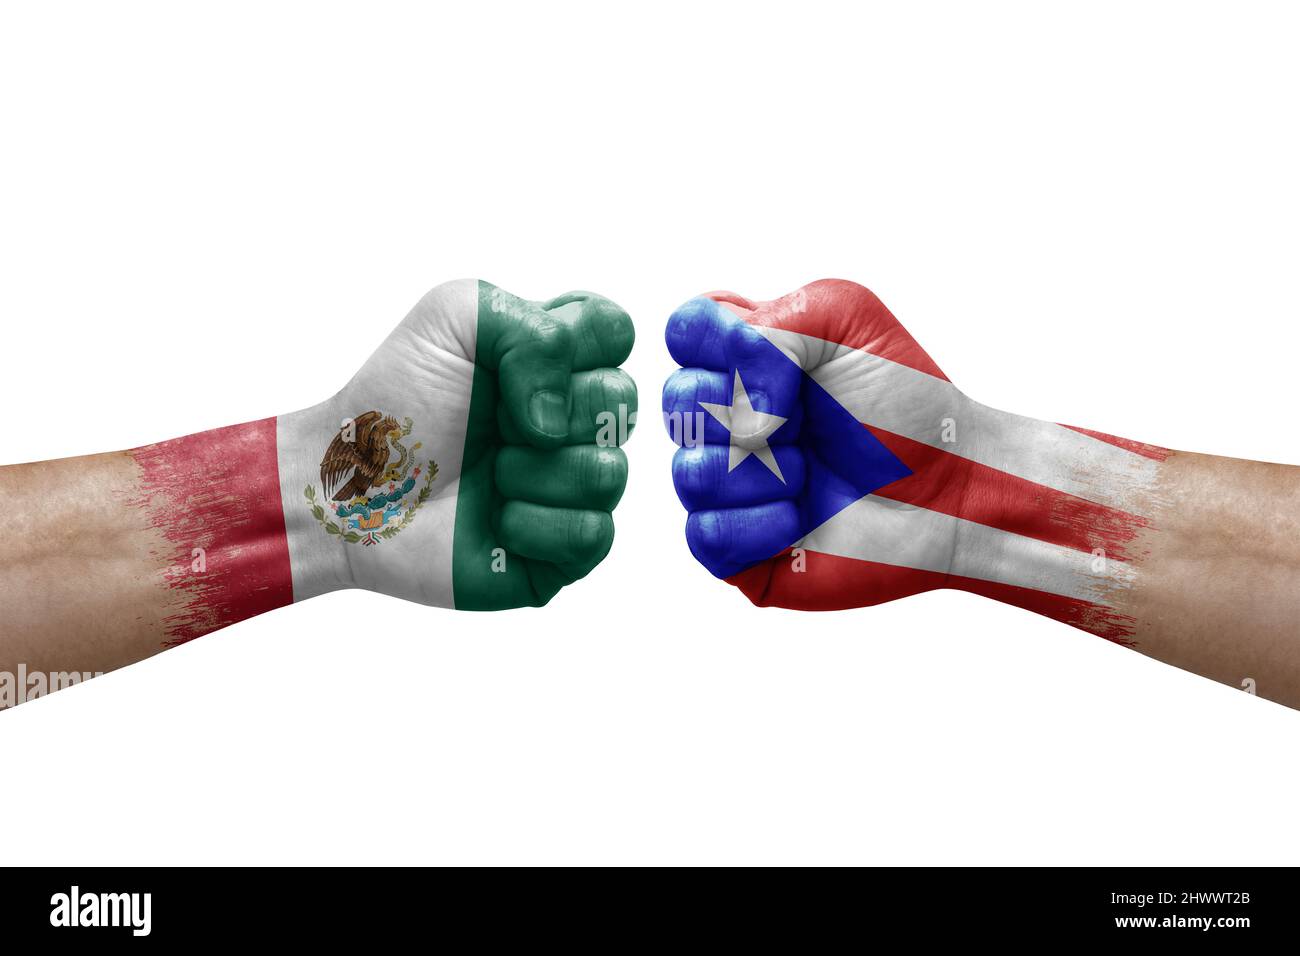 Puerto rico mexico flag Cut Out Stock Images & Pictures - Alamy